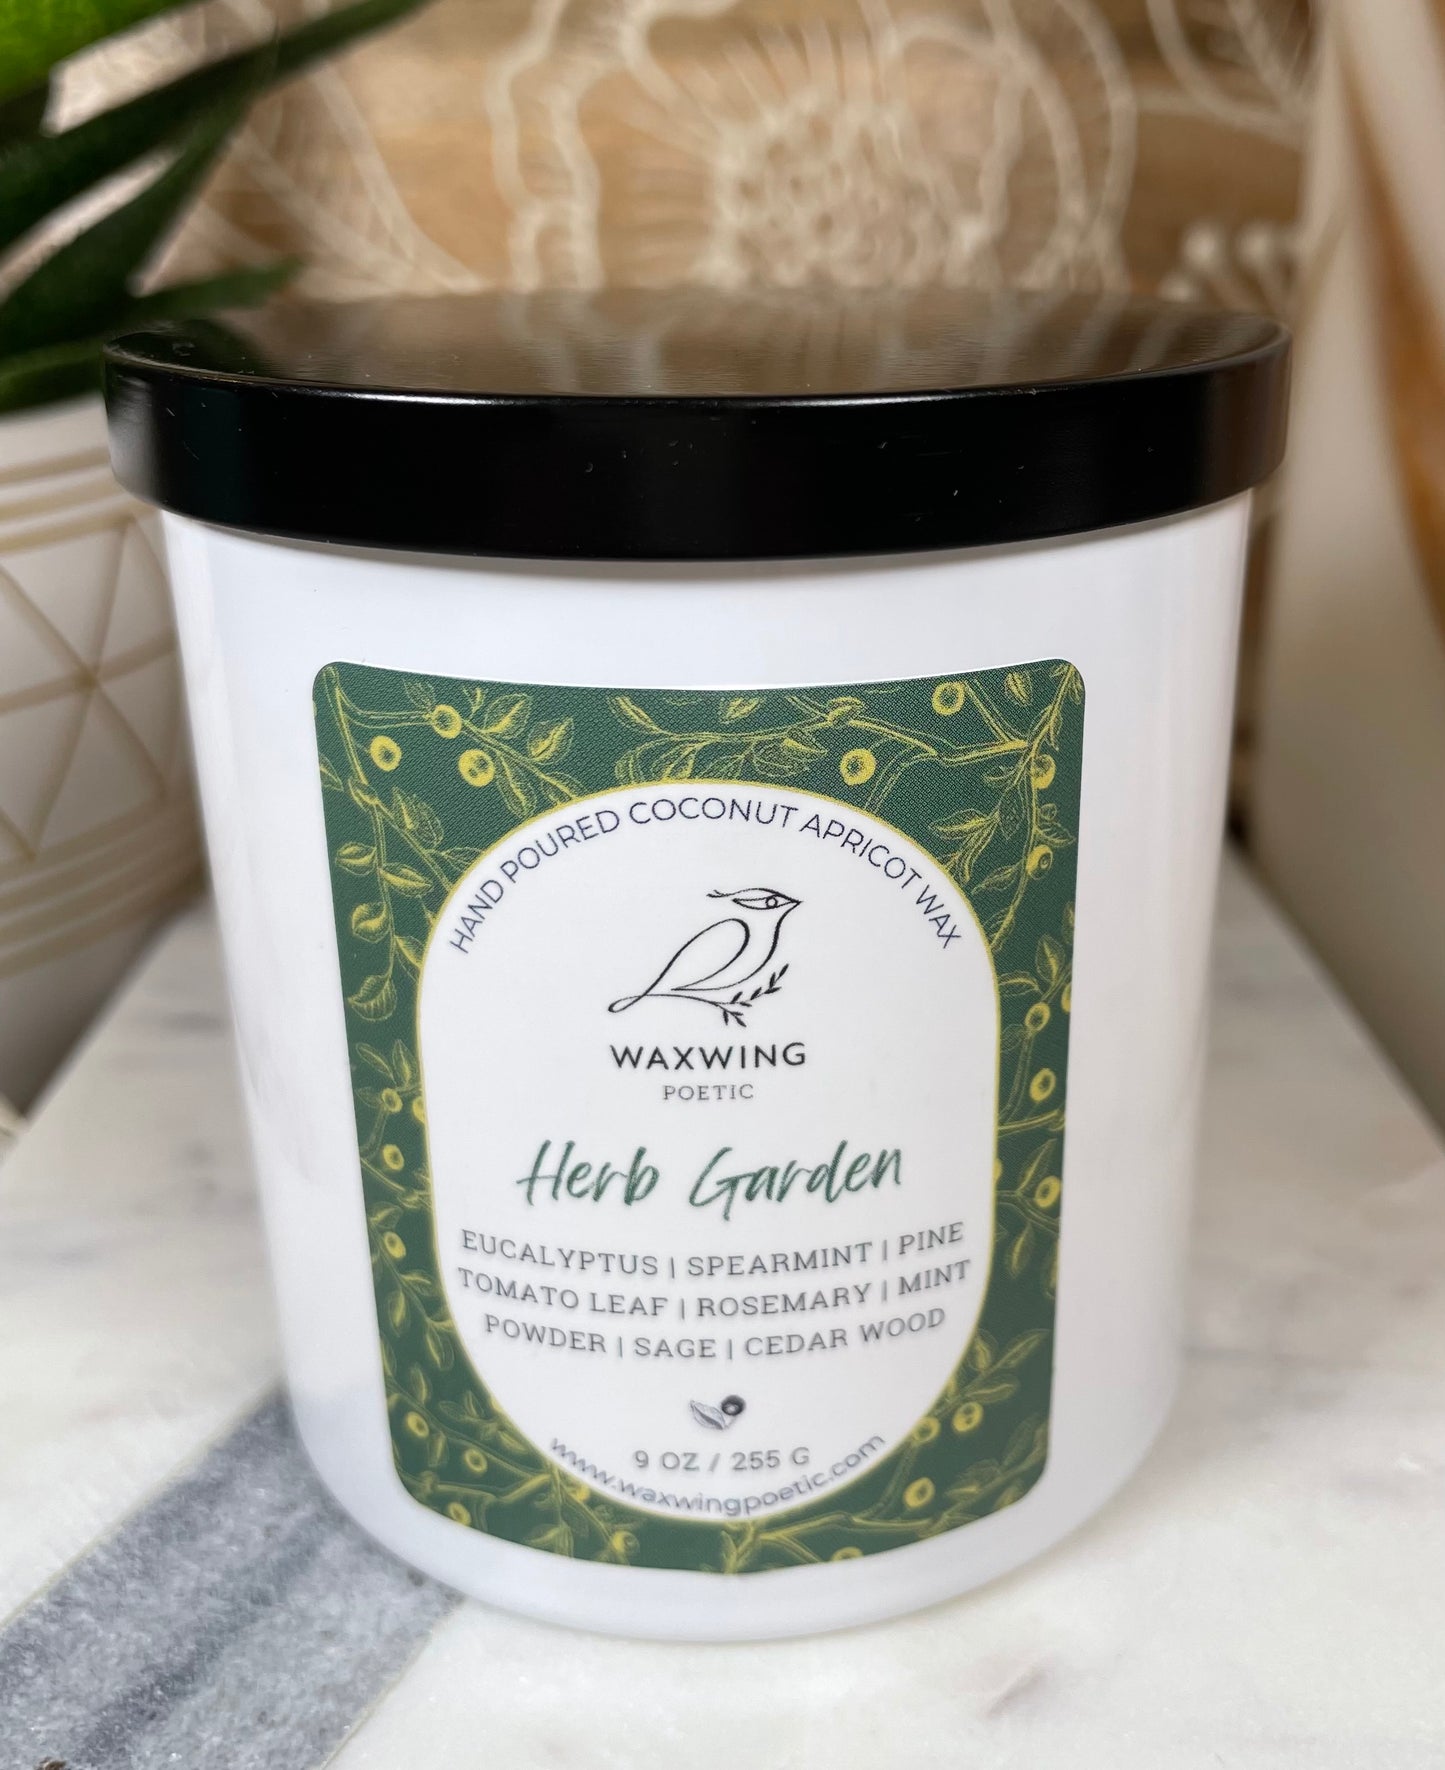 Herb Garden | Coconut Apricot Wax Candle